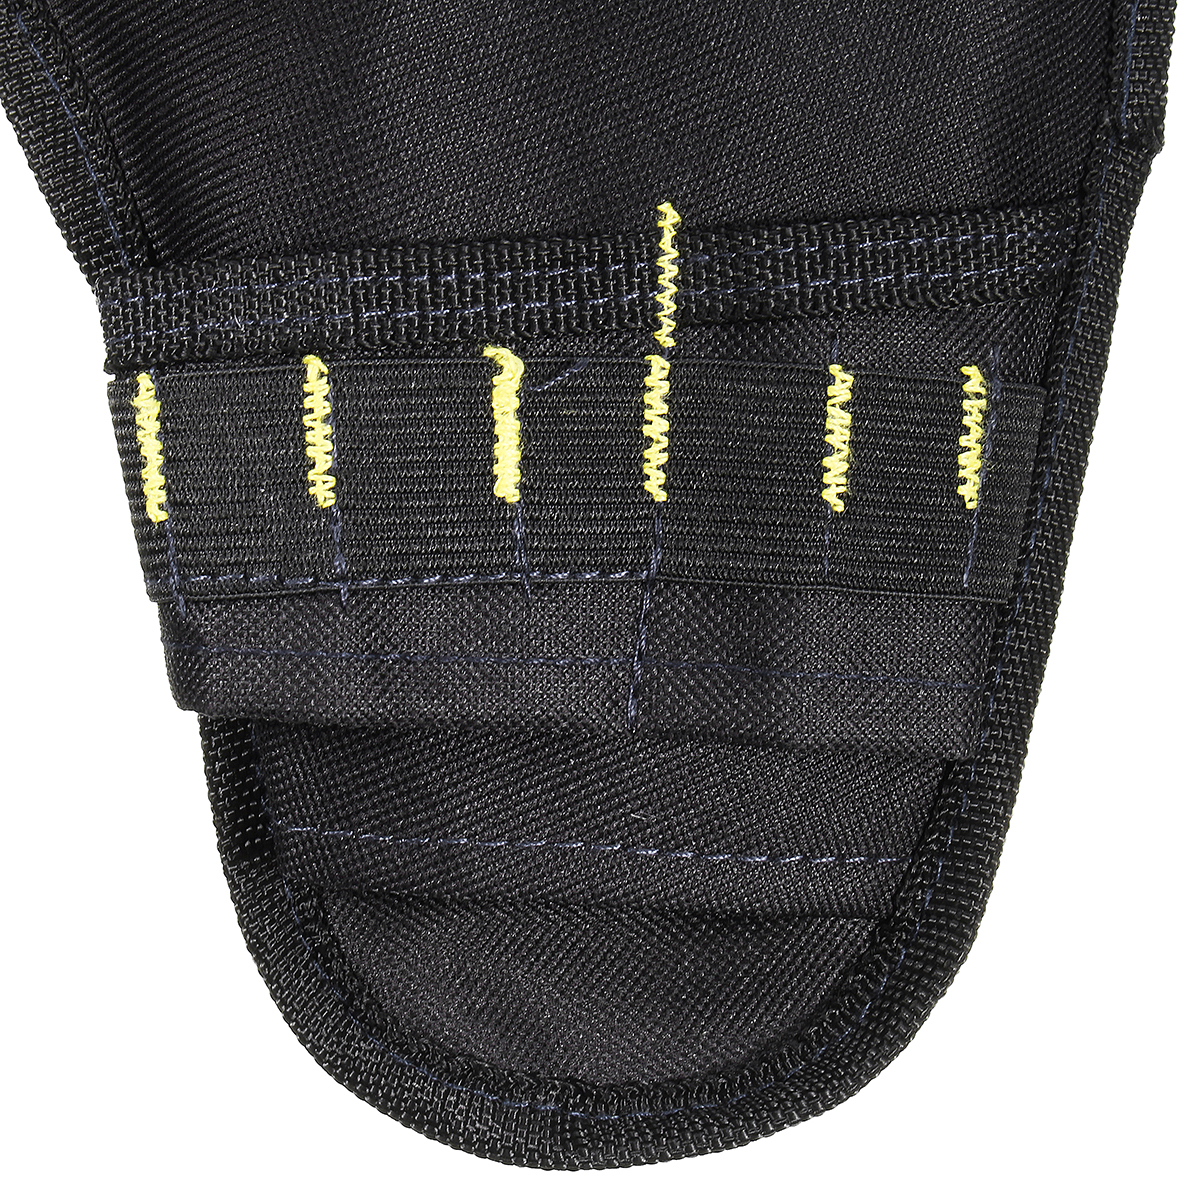 Heavy-Duty-Cordless-Impact-Drill-Holster-Tool-Bag-Belt-Pouch-Pocket-Holder-1187146-9